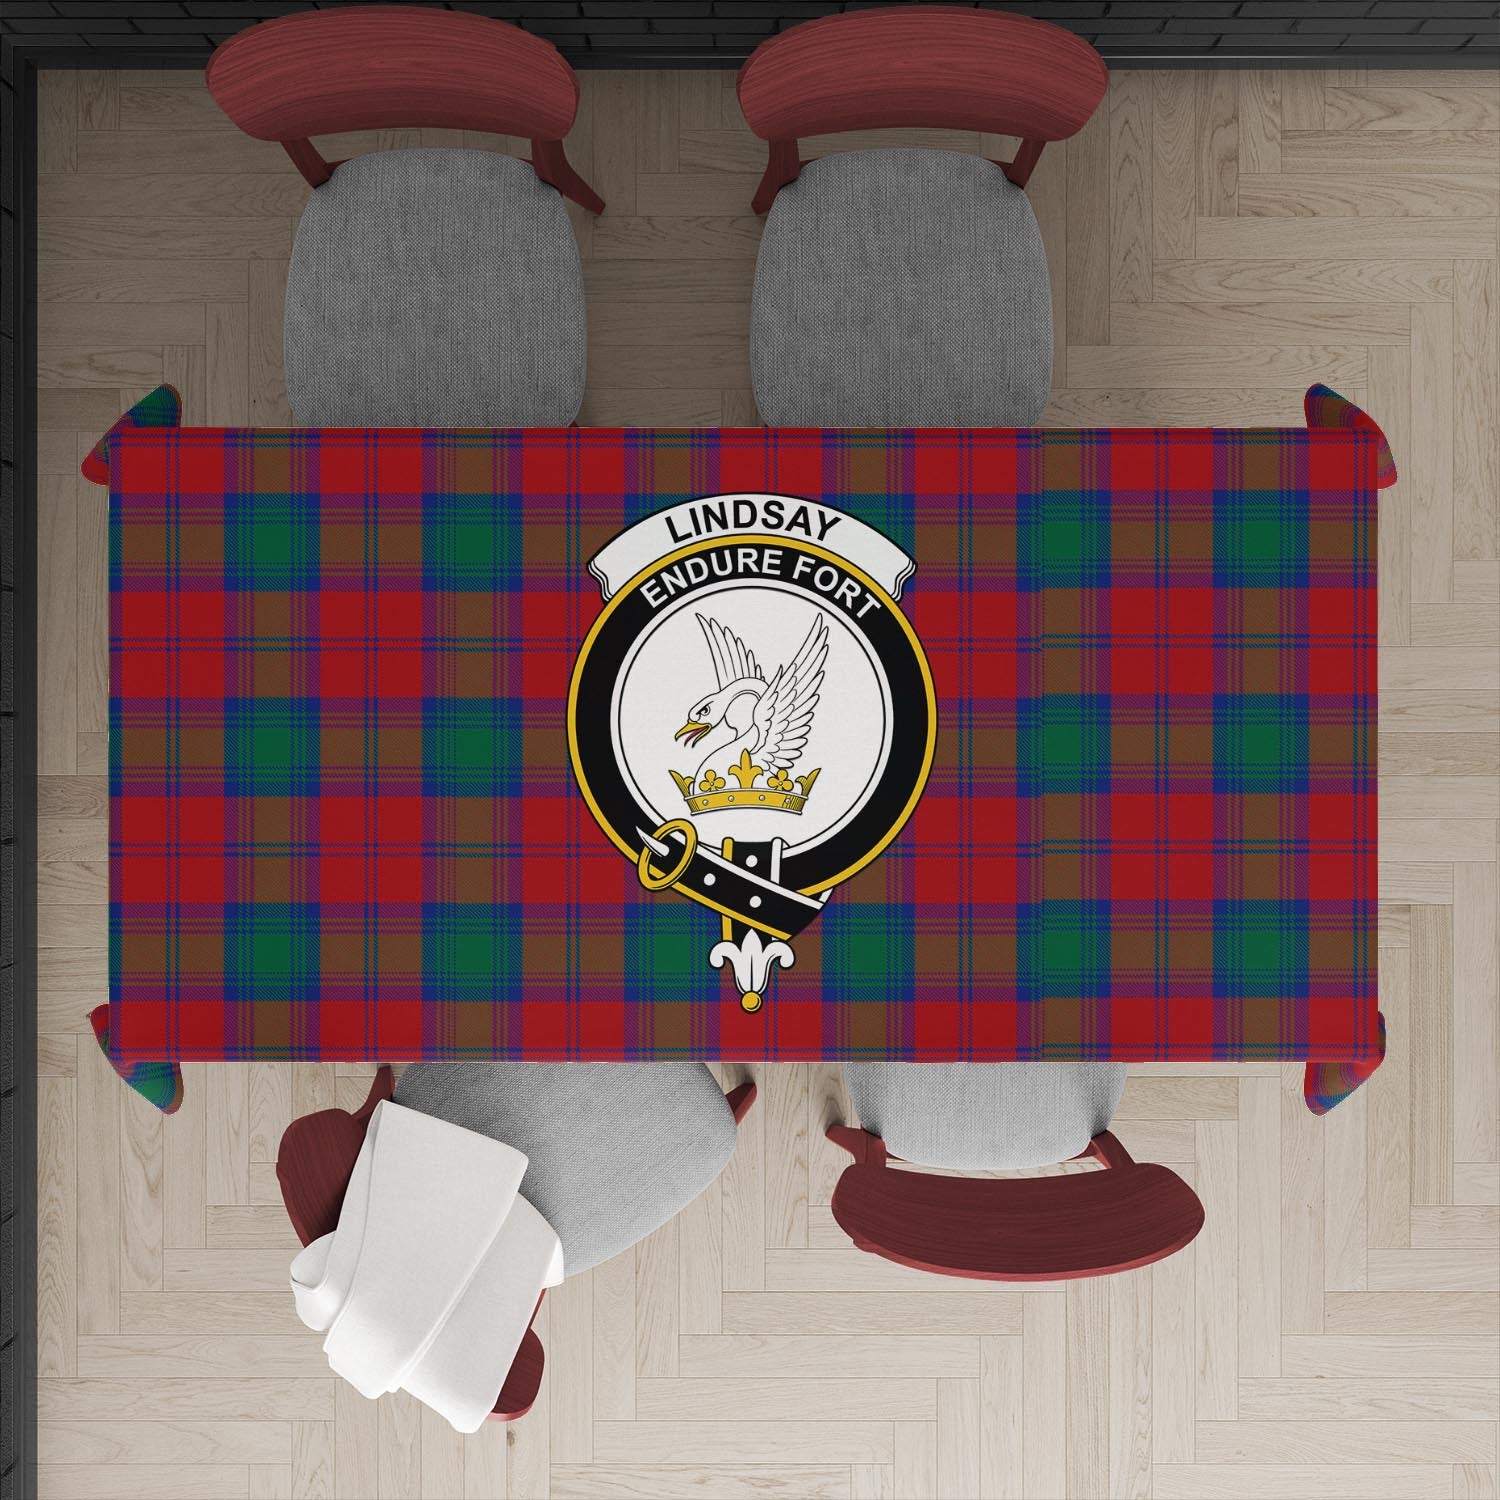 lindsay-modern-tatan-tablecloth-with-family-crest